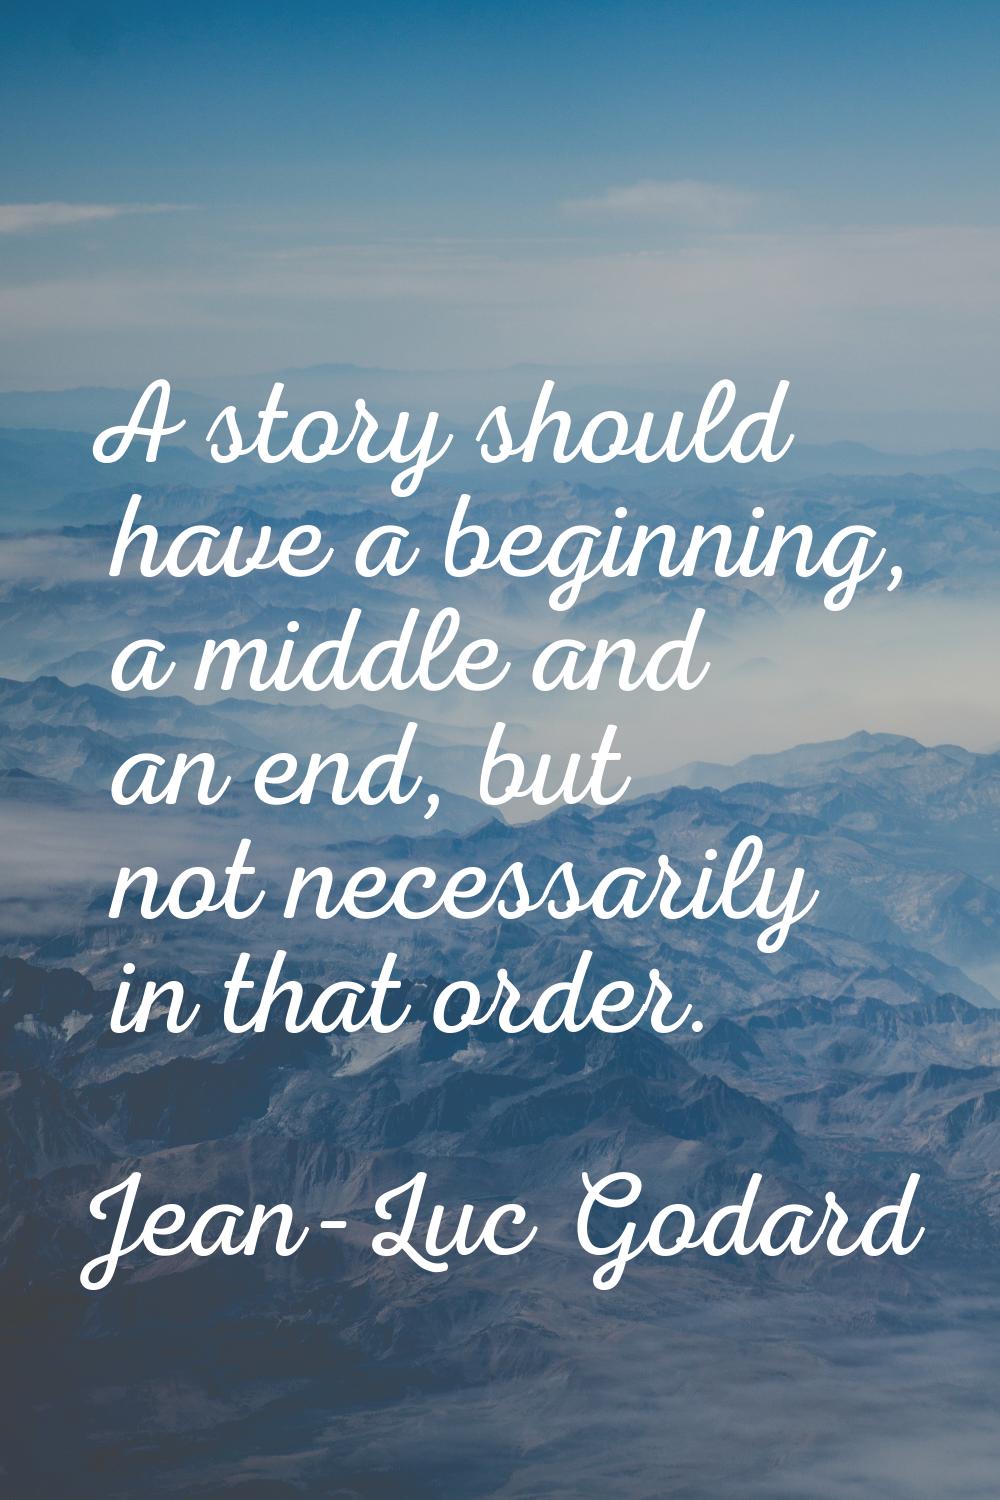 A story should have a beginning, a middle and an end, but not necessarily in that order.